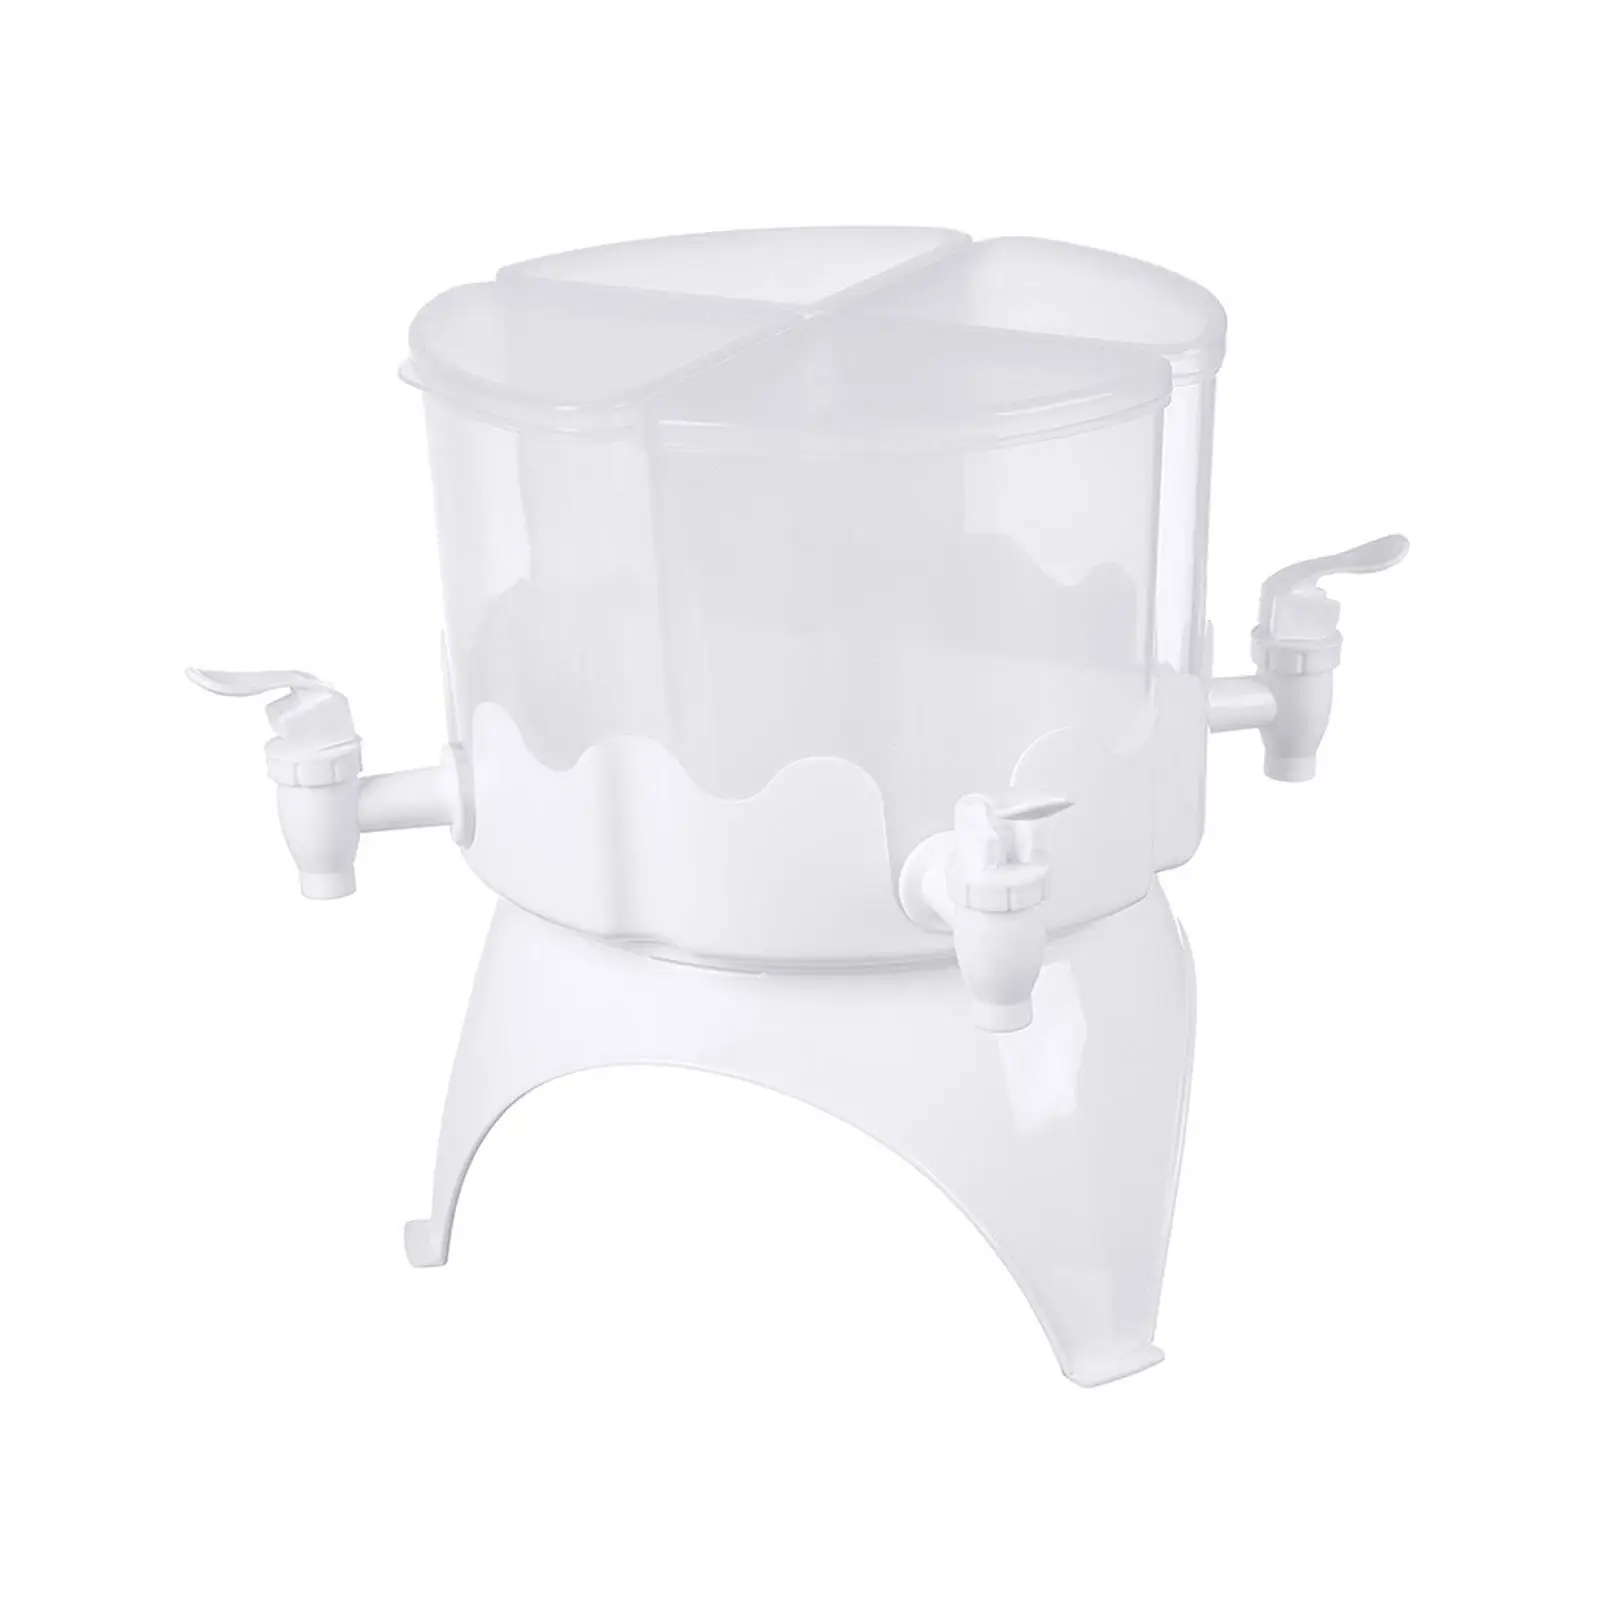 Beverage Dispenser with Spigot Juice Jug for Home Outdoor Party Party